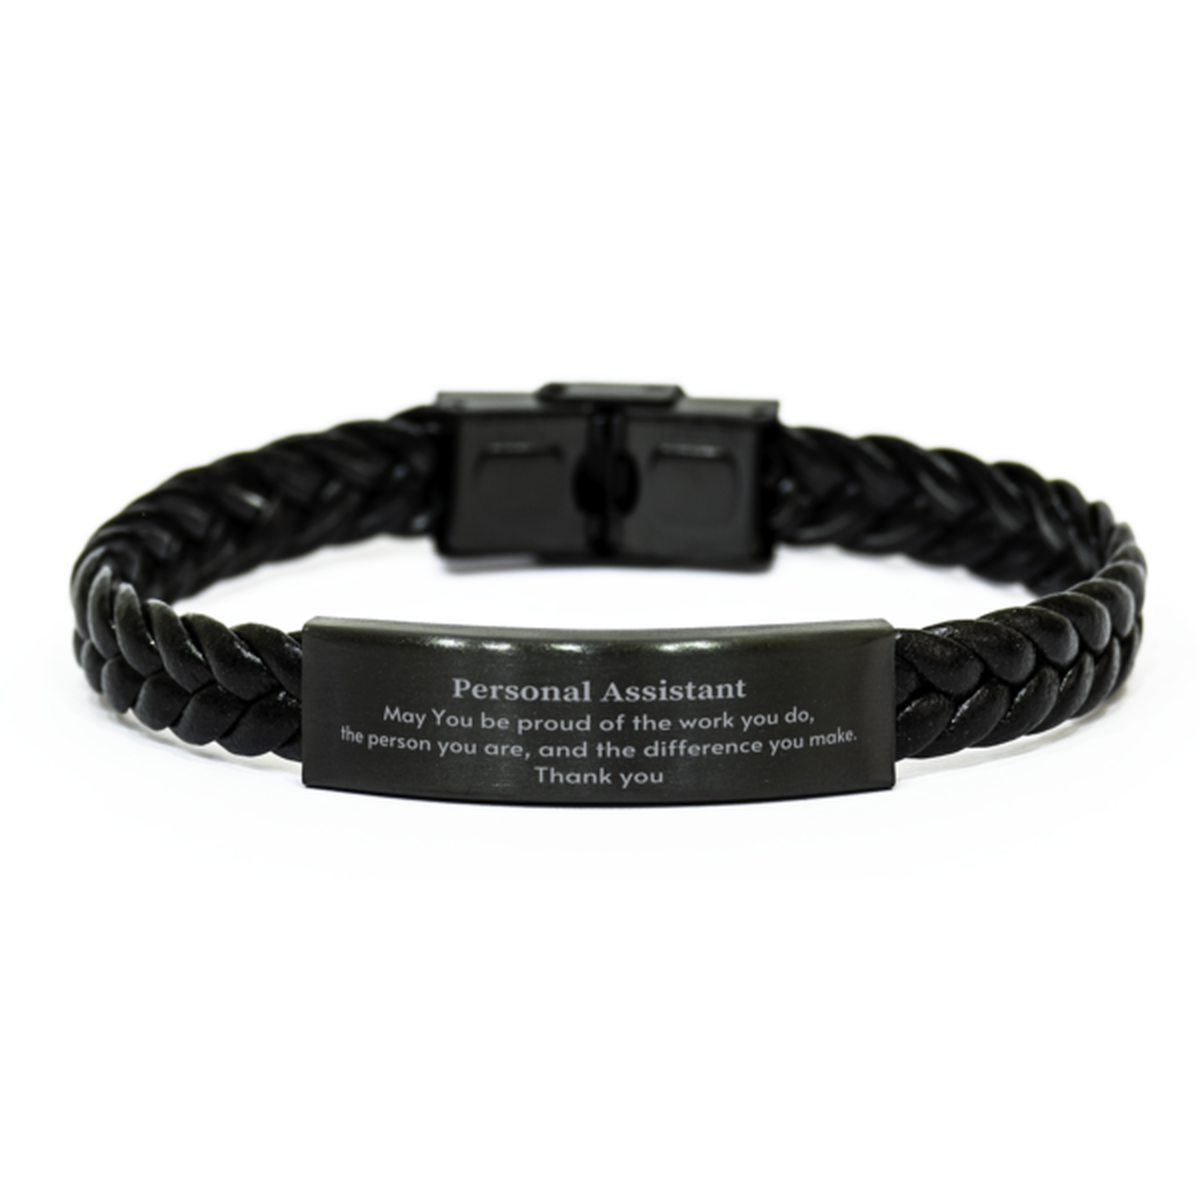 Heartwarming Braided Leather Bracelet Retirement Coworkers Gifts for Personal Assistant, Personal Assistant May You be proud of the work you do, the person you are Gifts for Boss Men Women Friends